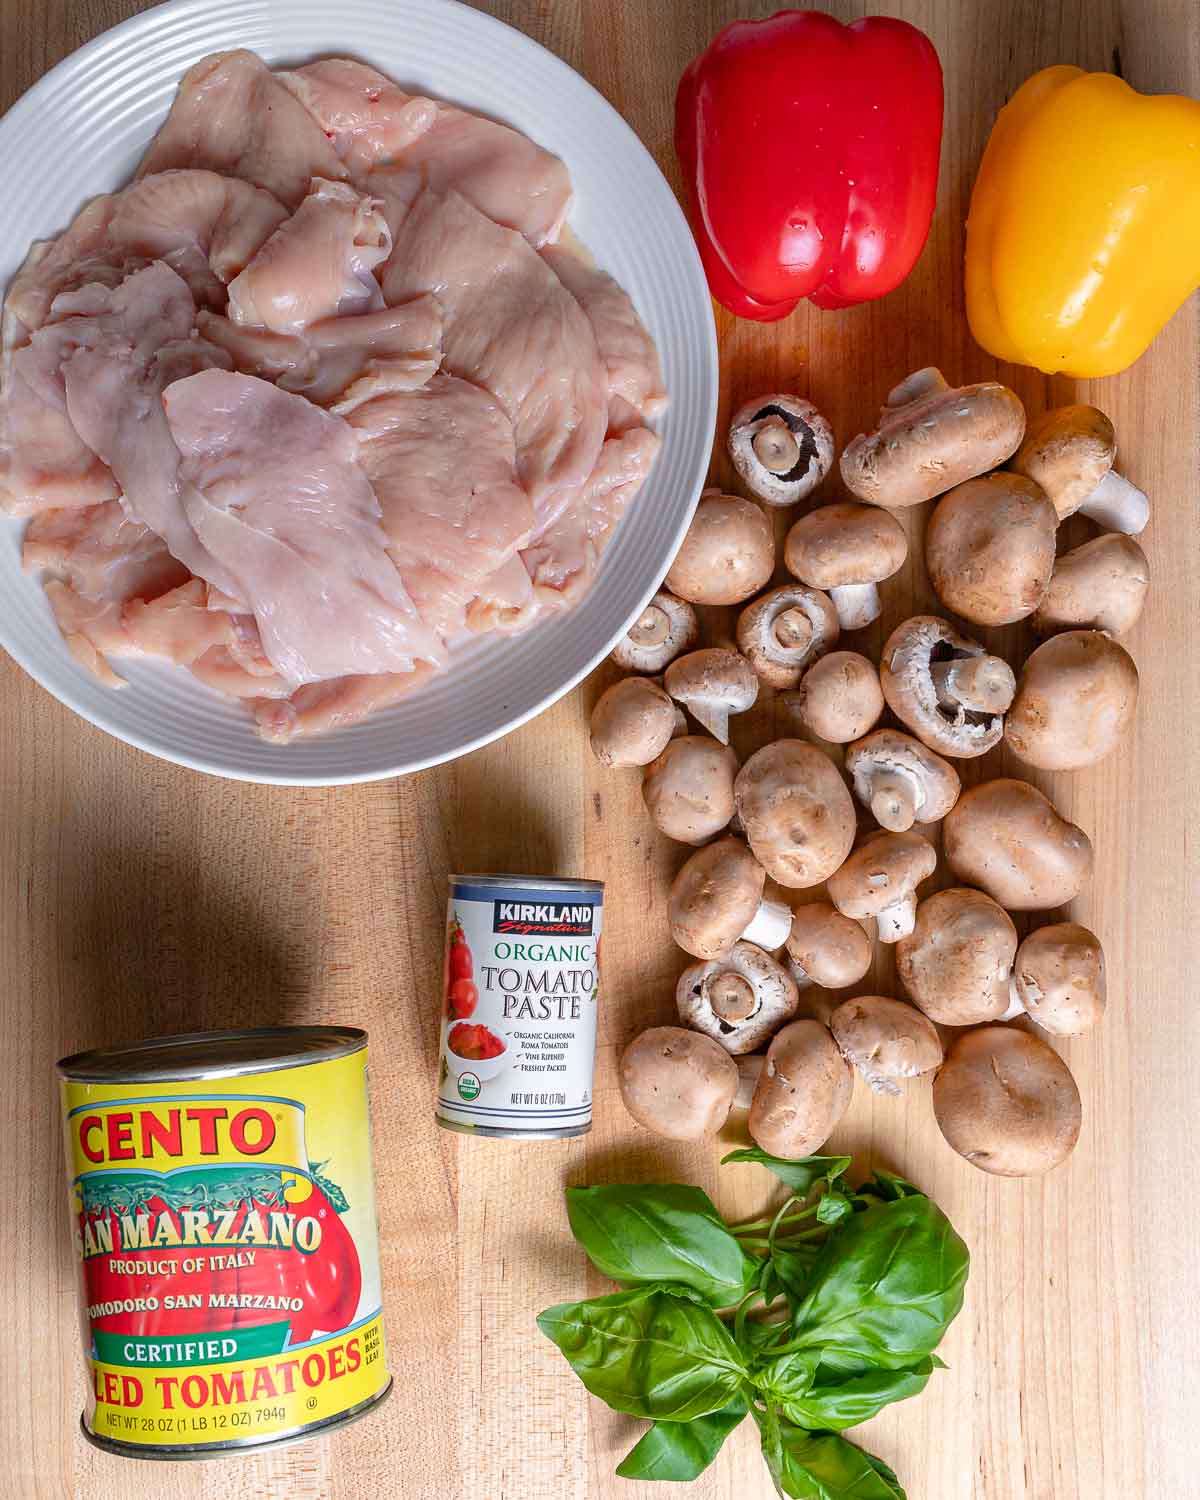 Ingredients shown: plate of chicken, peppers, canned tomatoes, mushrooms, and basil.